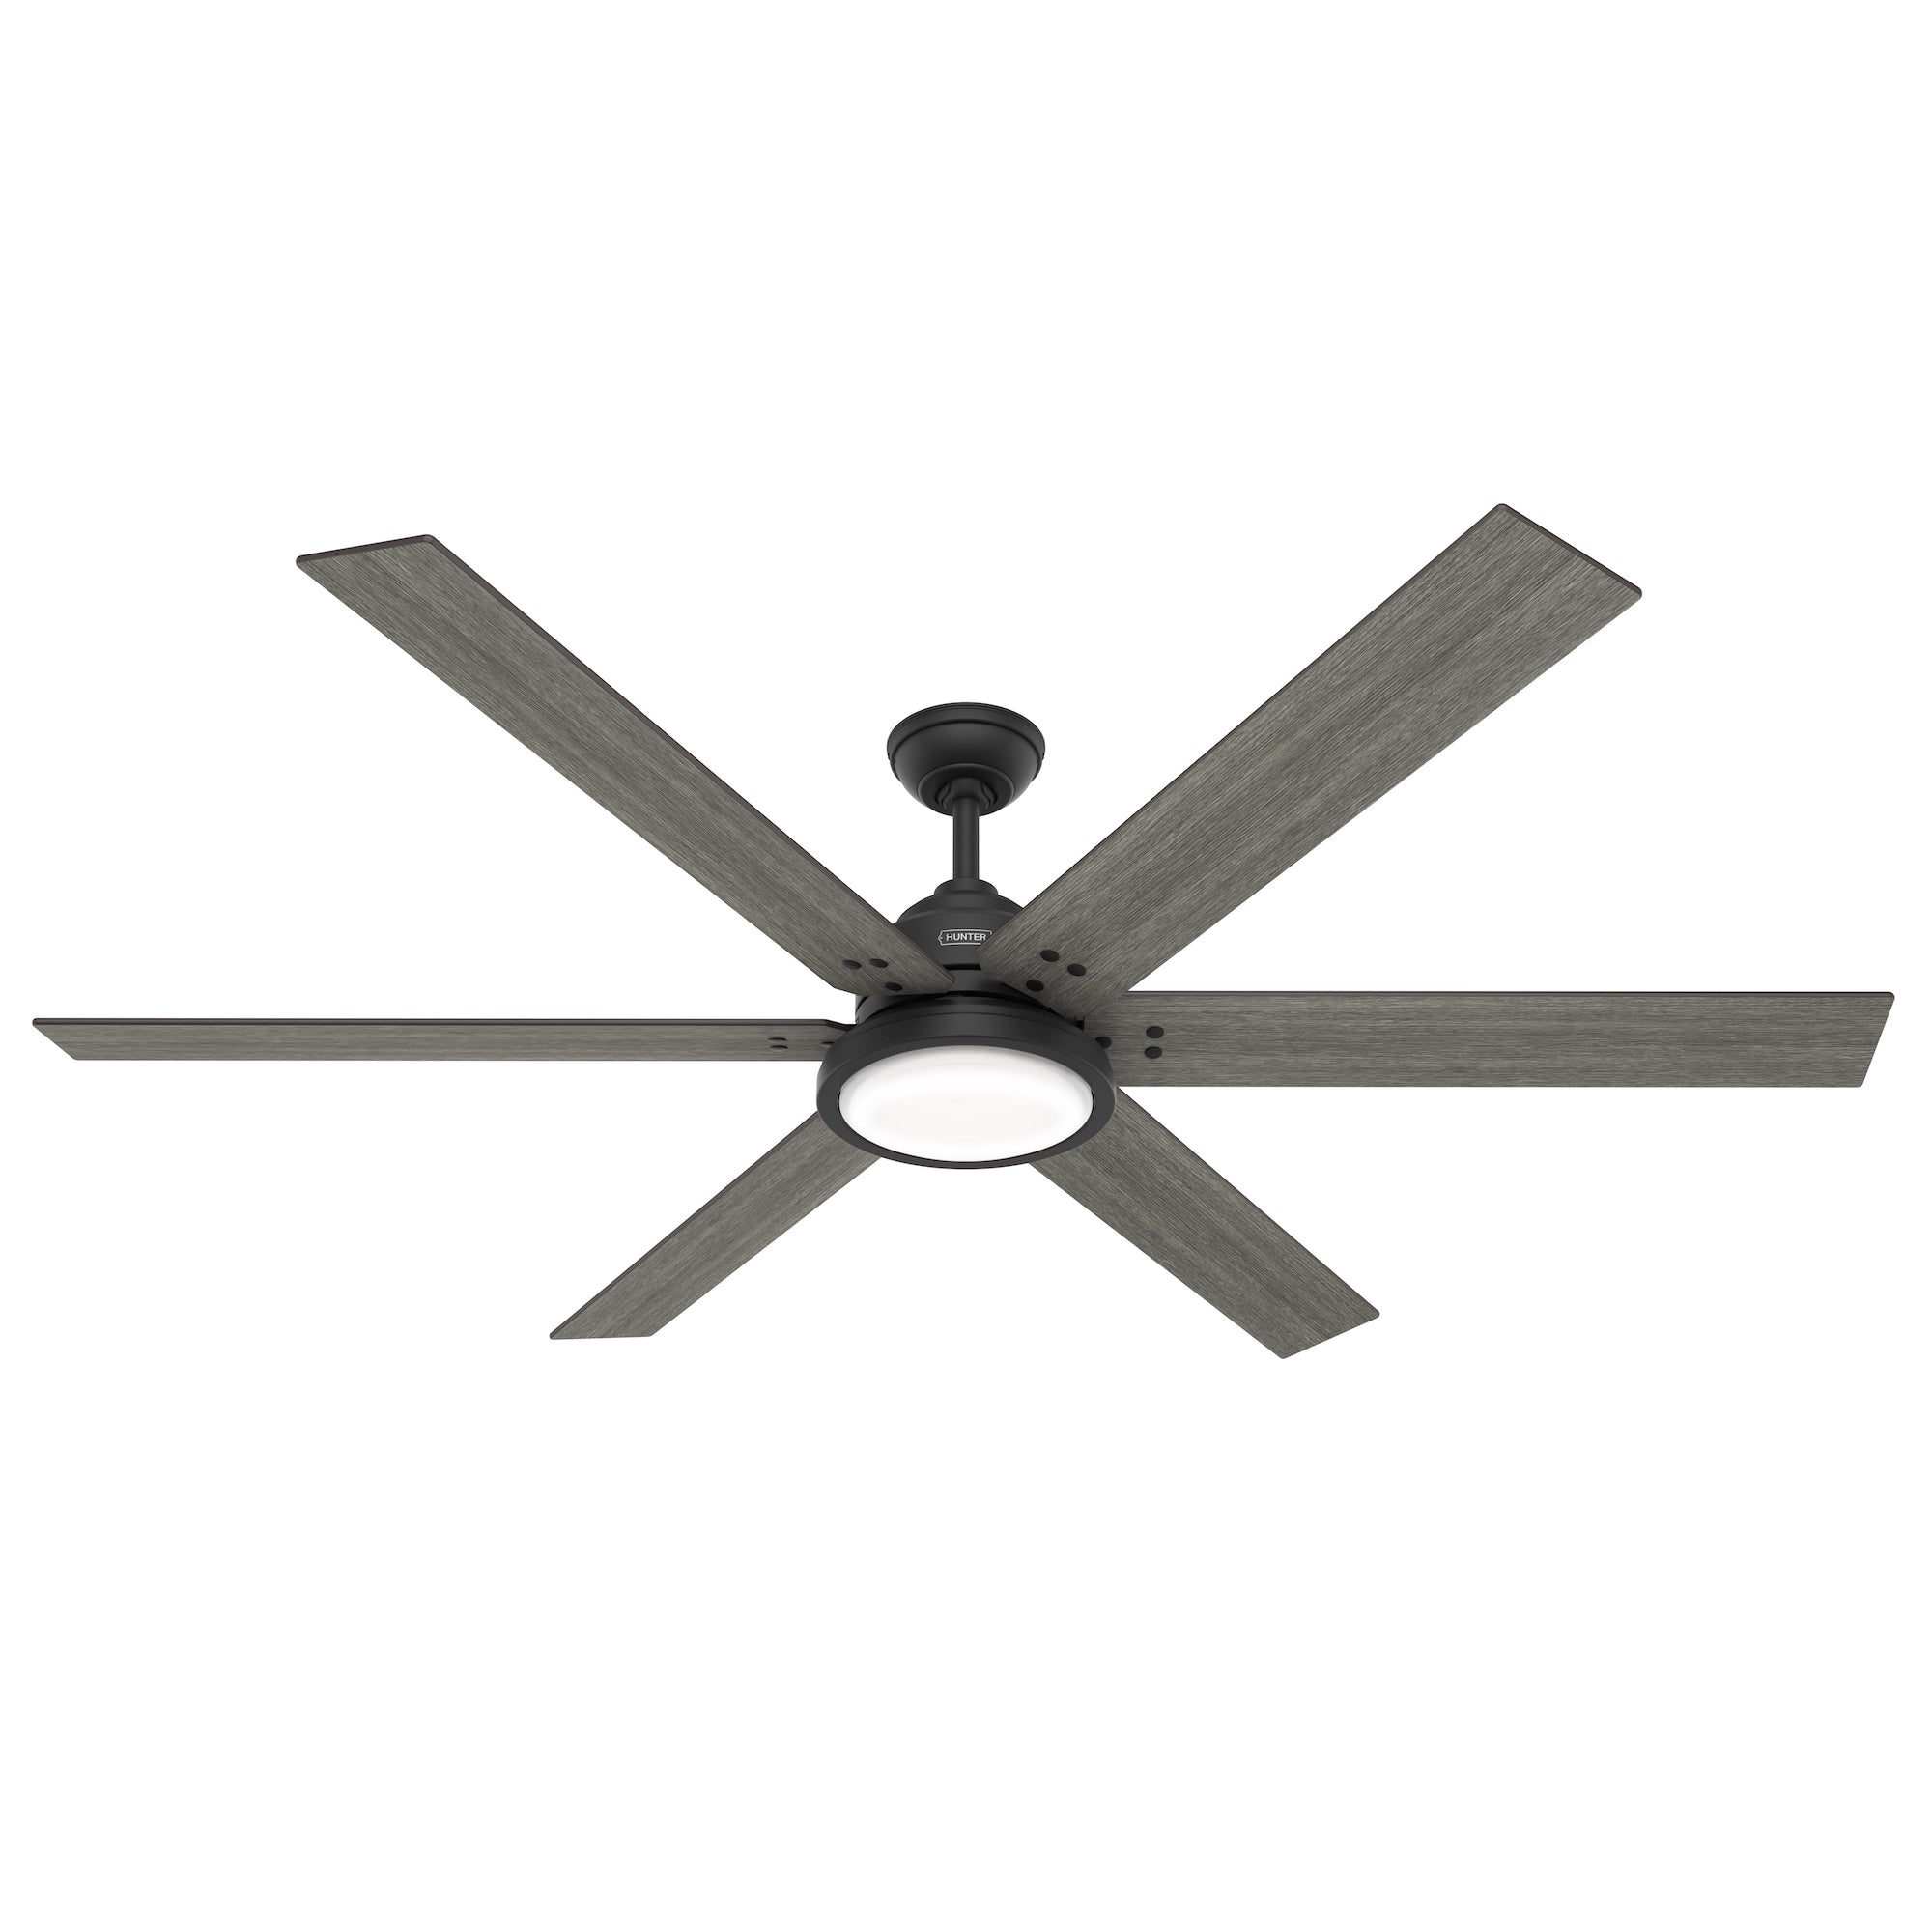 Hunter 70 inch Warrant Ceiling Fan with LED Light Kit and Wall Control